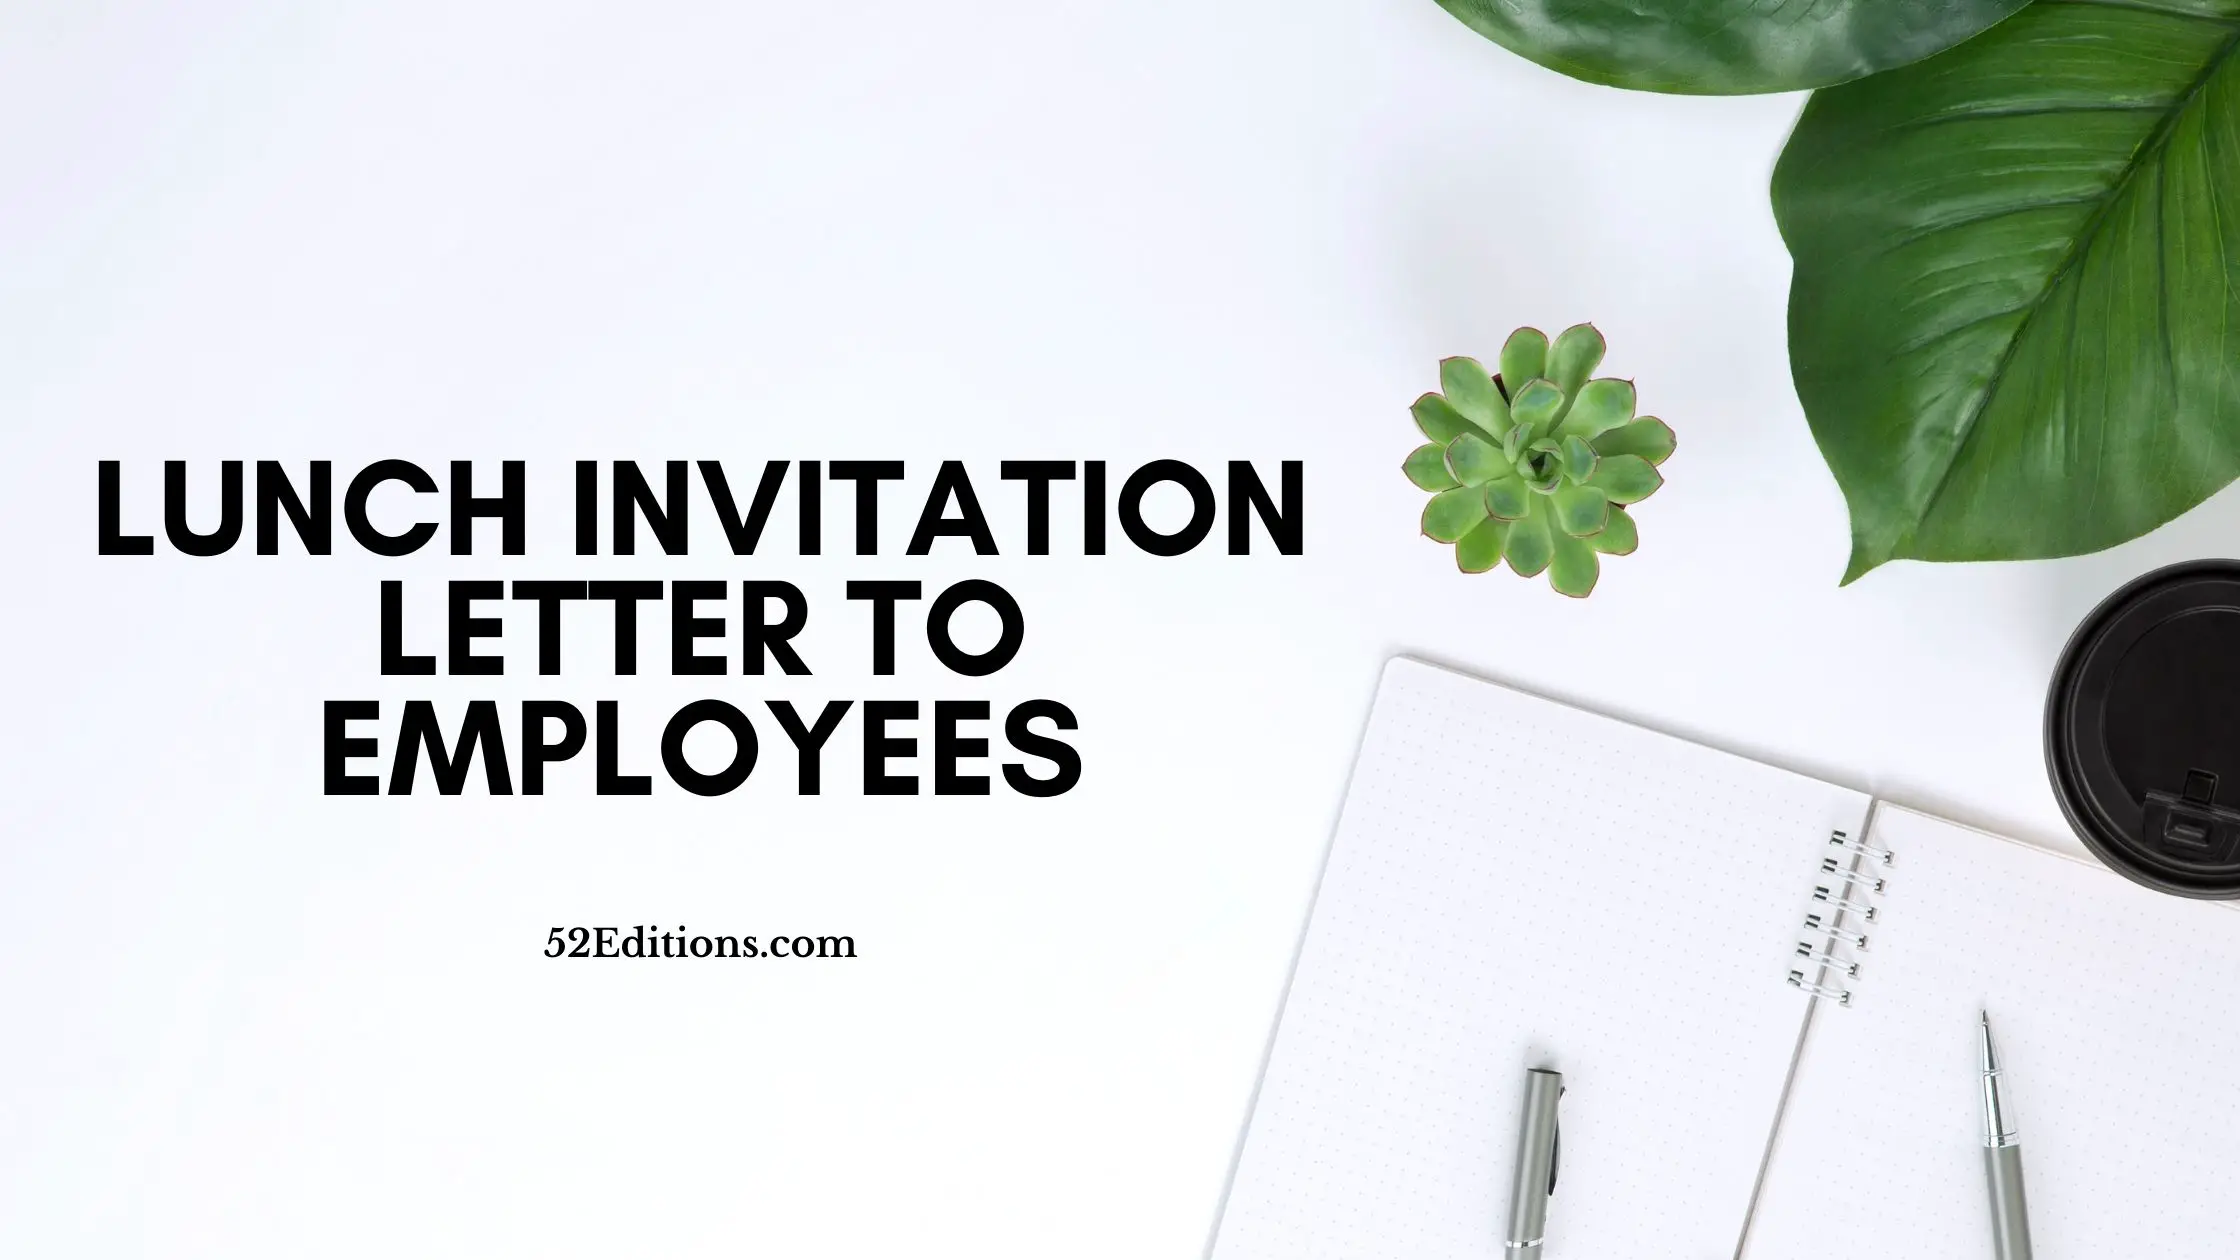 Lunch Invitation Letter To Employees // FREE Letter Templates